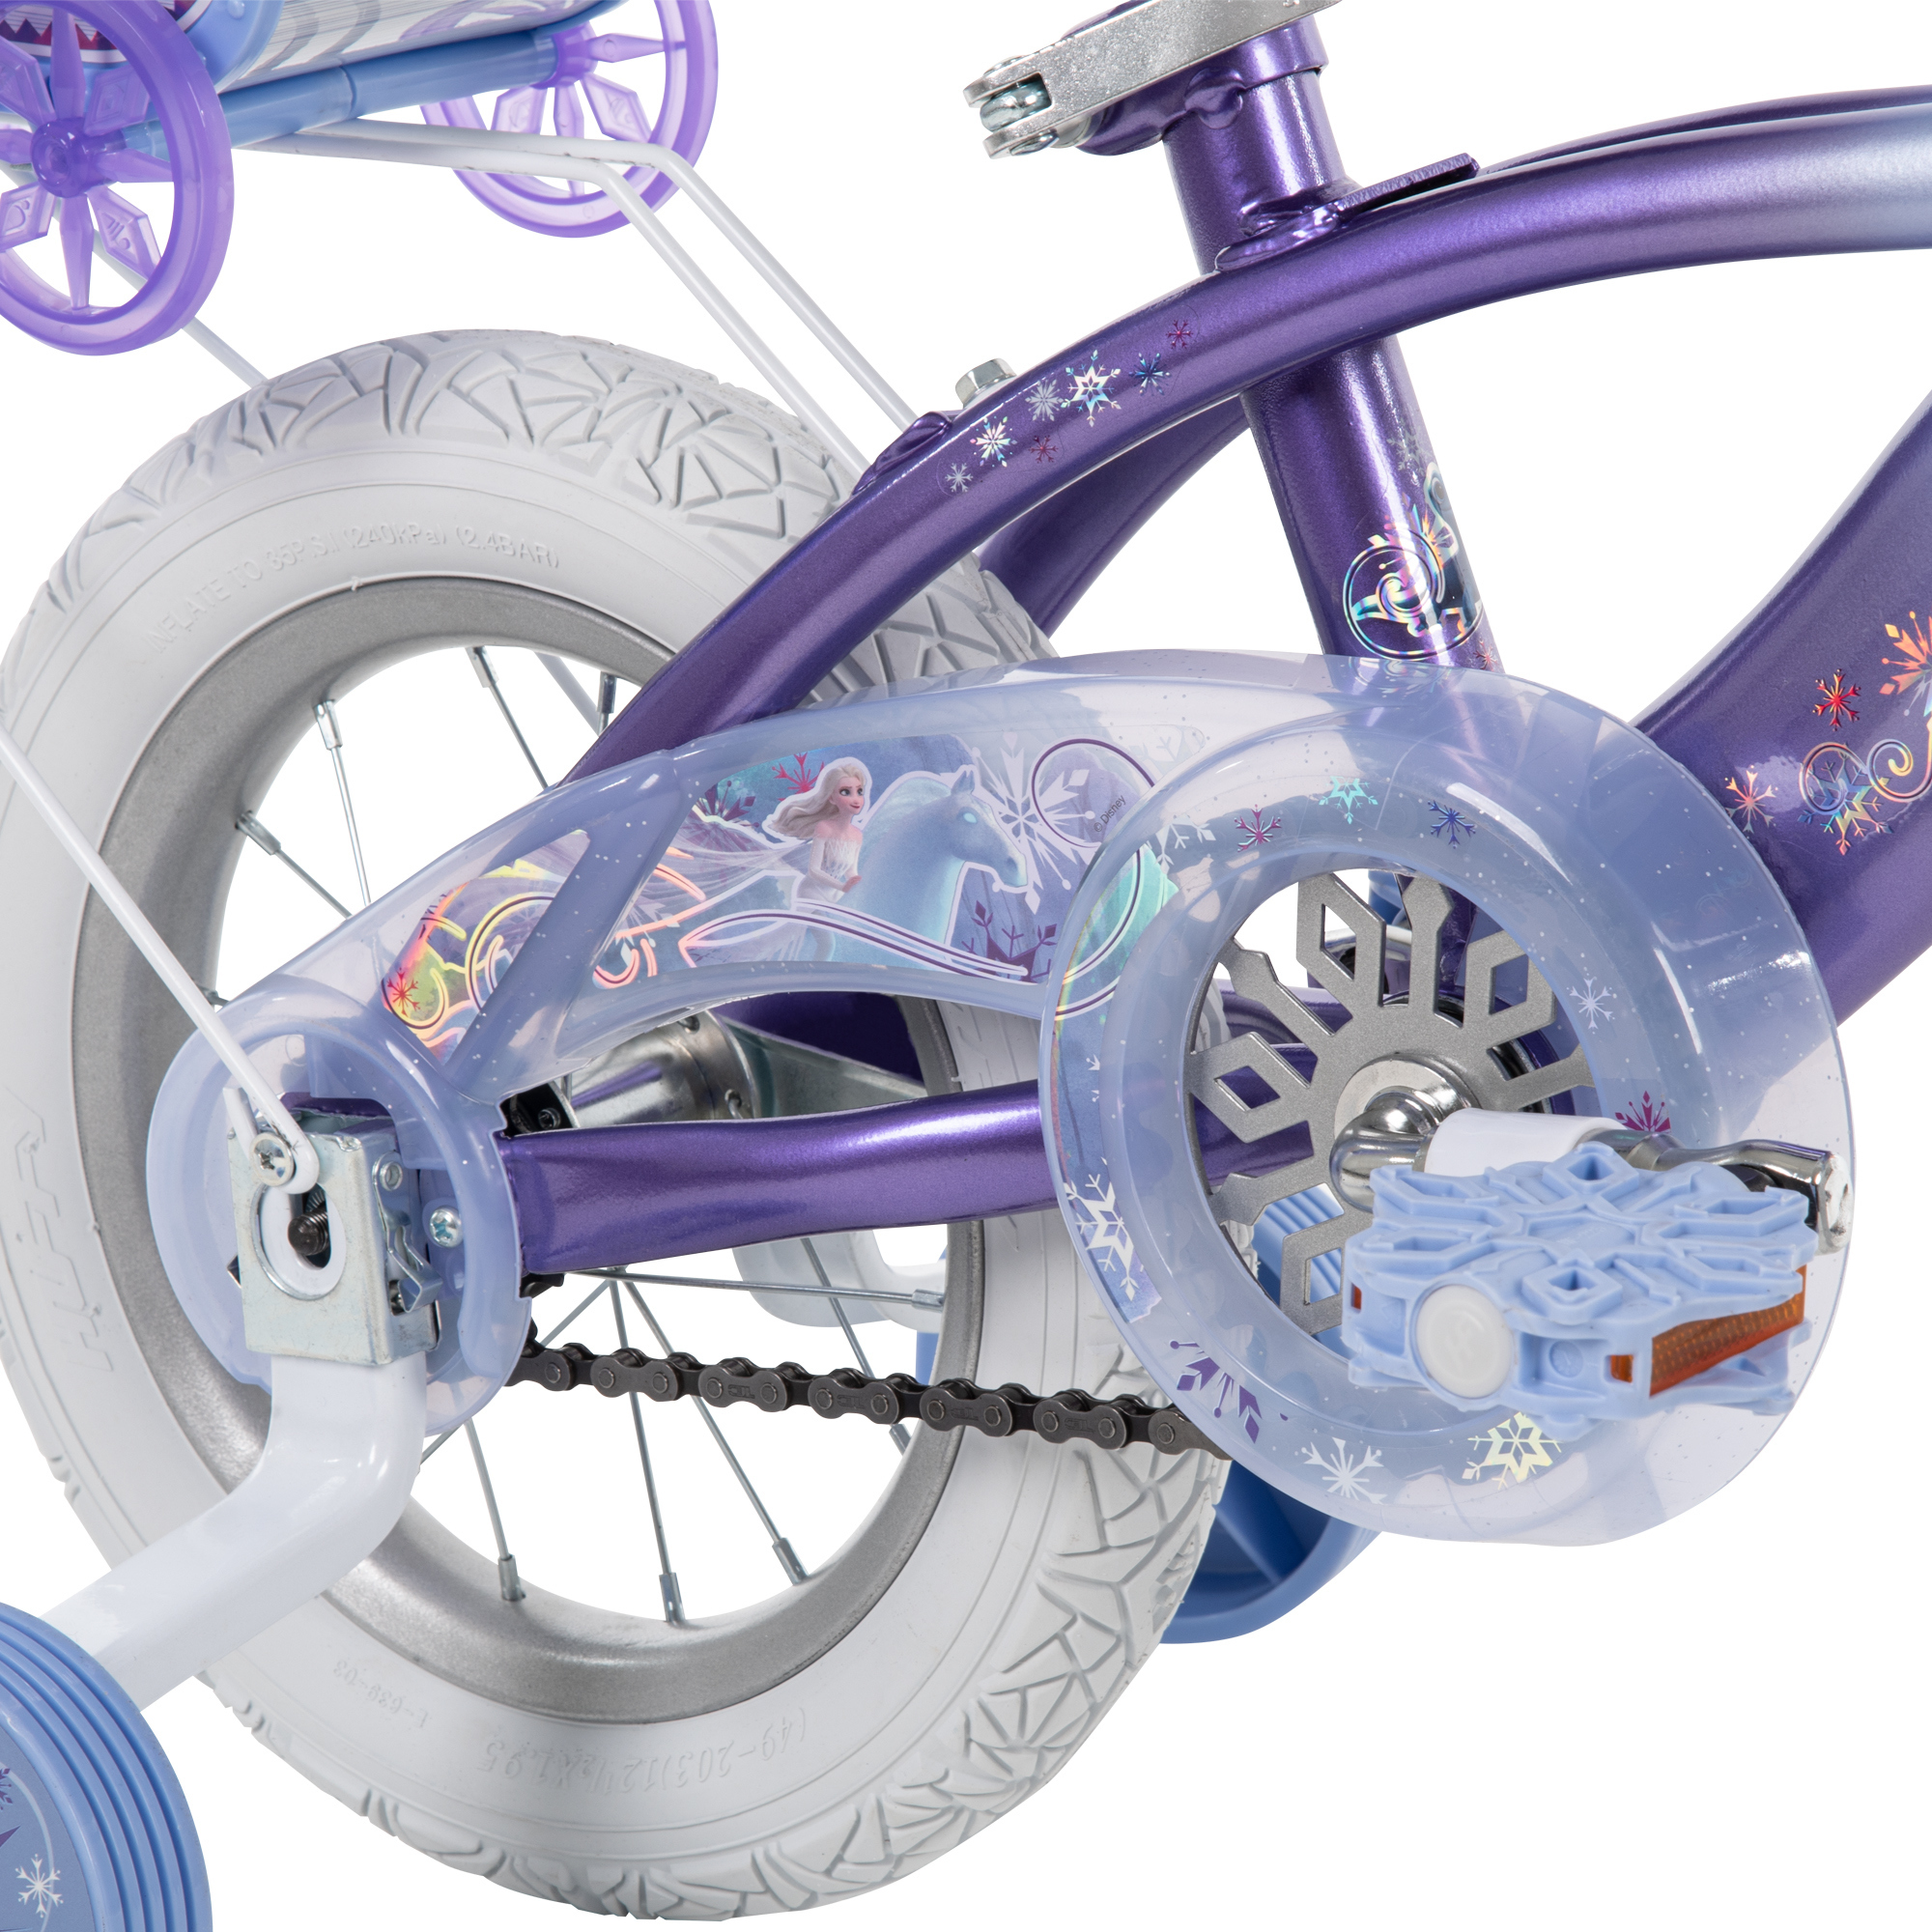 Disney Frozen 12 in. Bike with Doll Carrier Sleigh for Girl's, Ages 2+ Years, White and Purple by Huffy - image 11 of 19